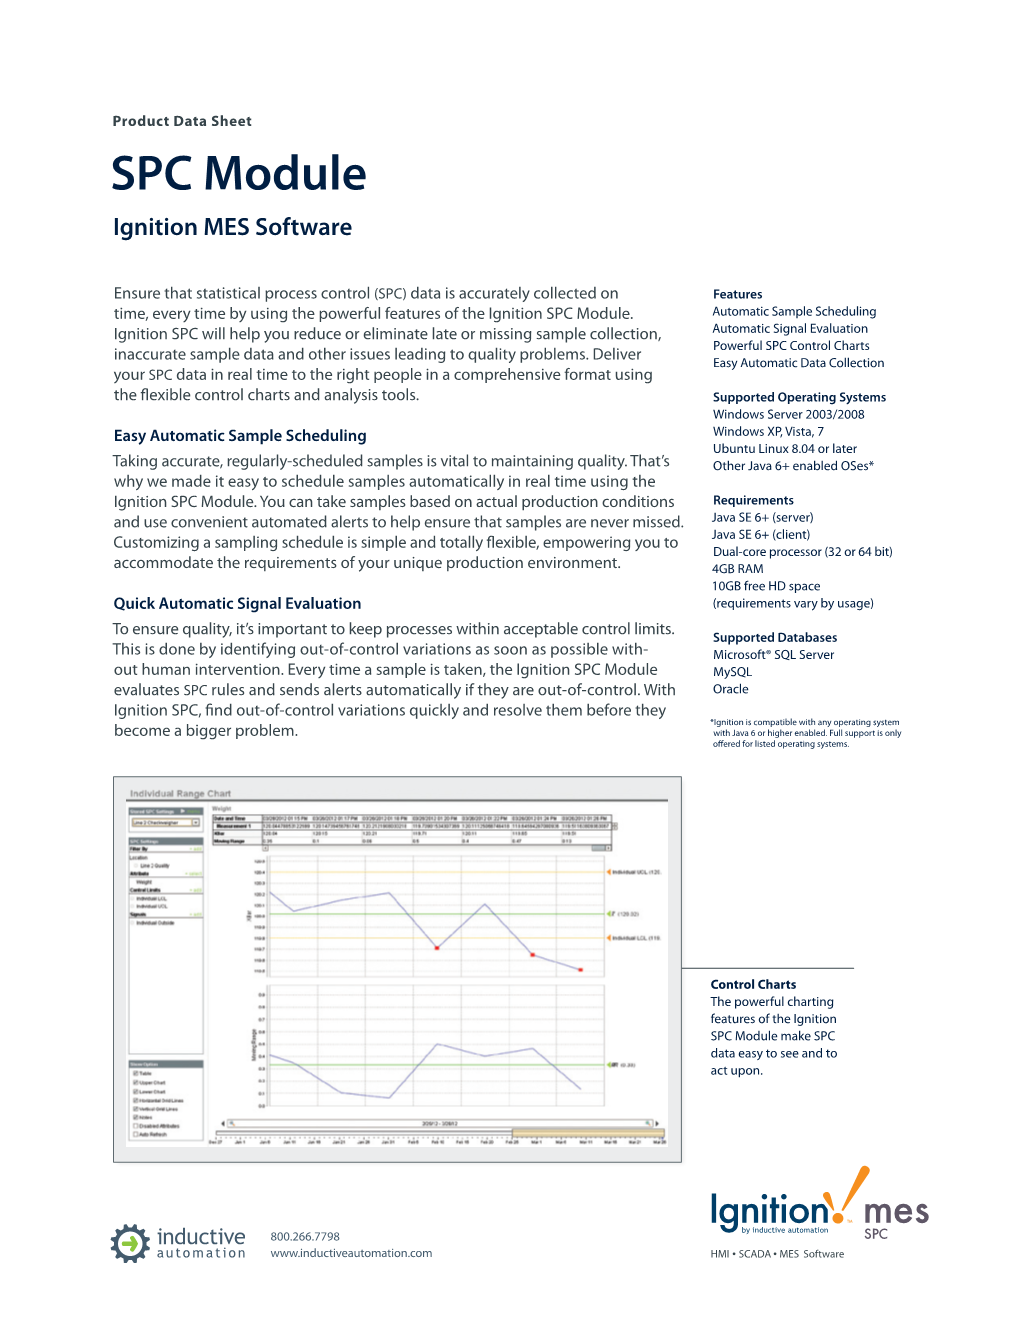 SPC Module Ignition MES Software